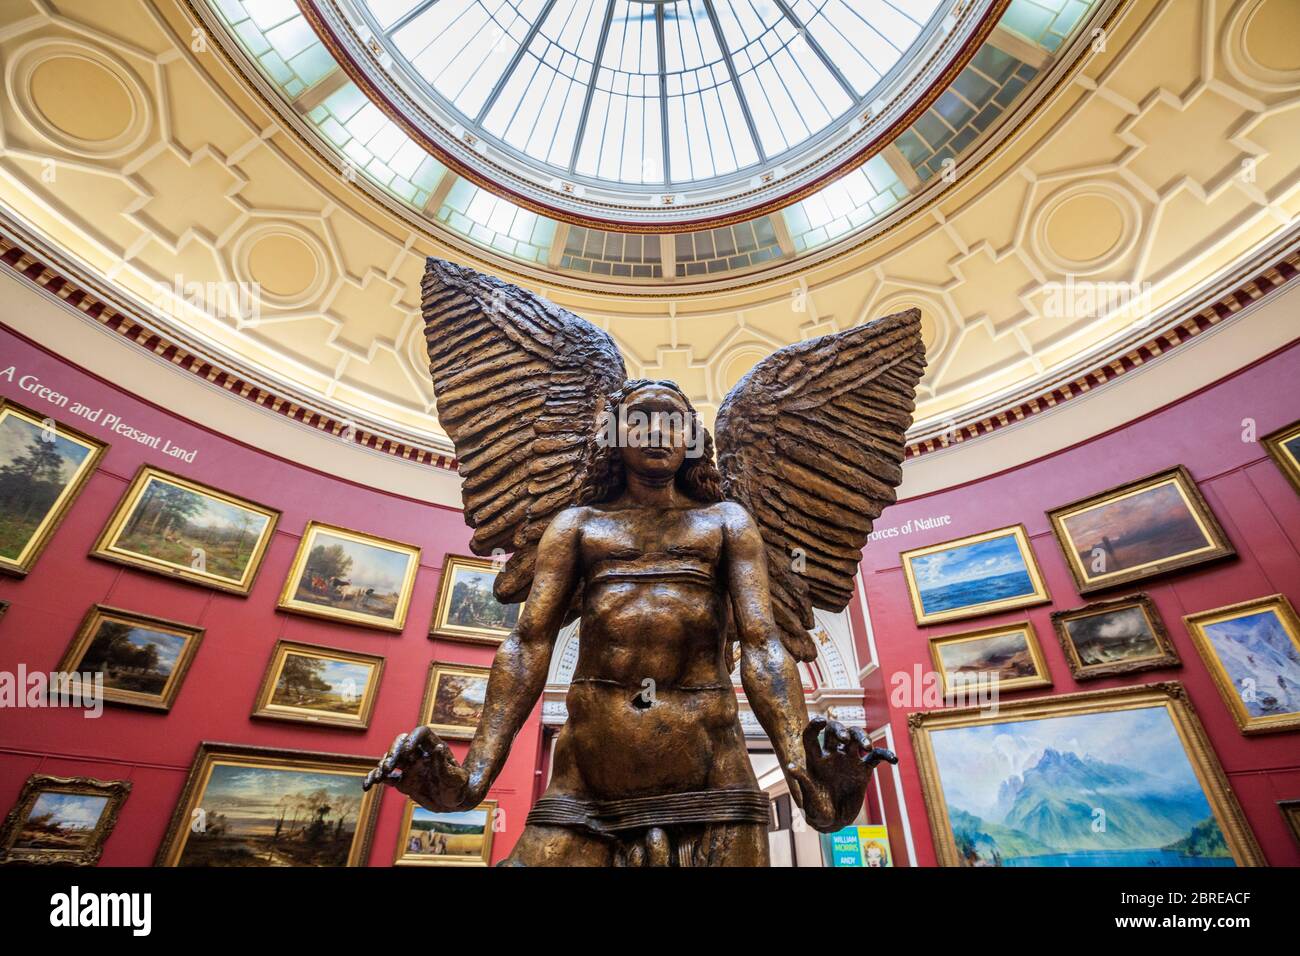 The Archangel Lucifer sculpture in the Round Room Gallery at the Birmingham Museum and Art Gallery, England Stock Photo